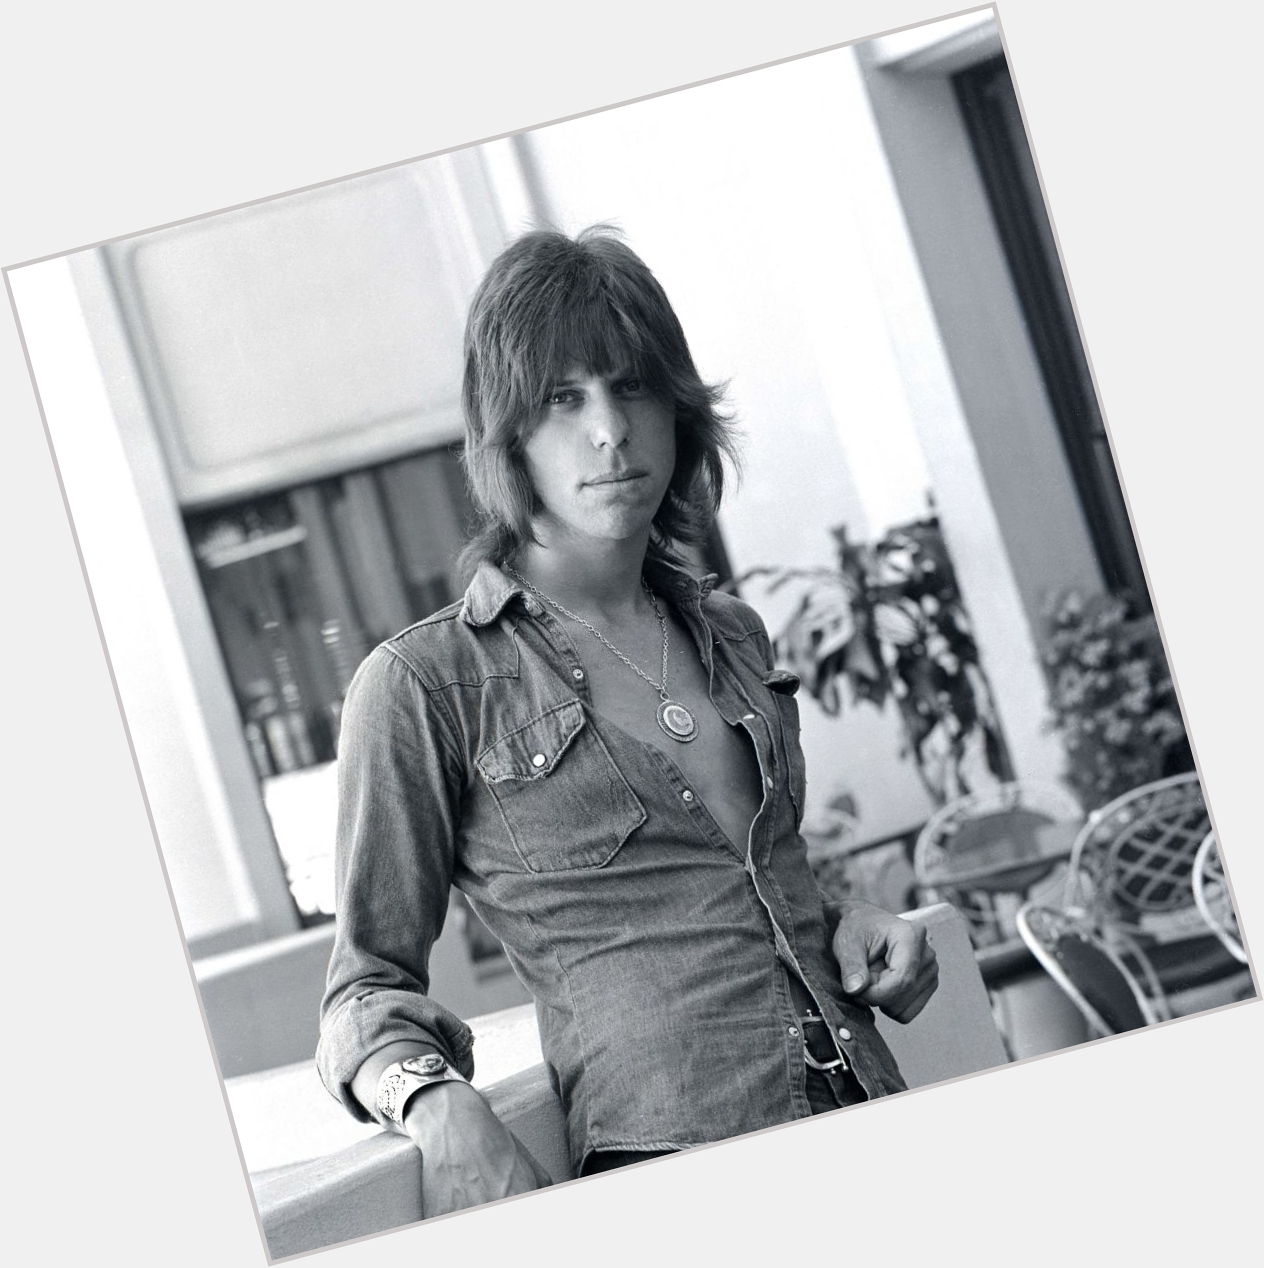 Happy Birthday to the great, Jeff Beck who is 76 years young today 